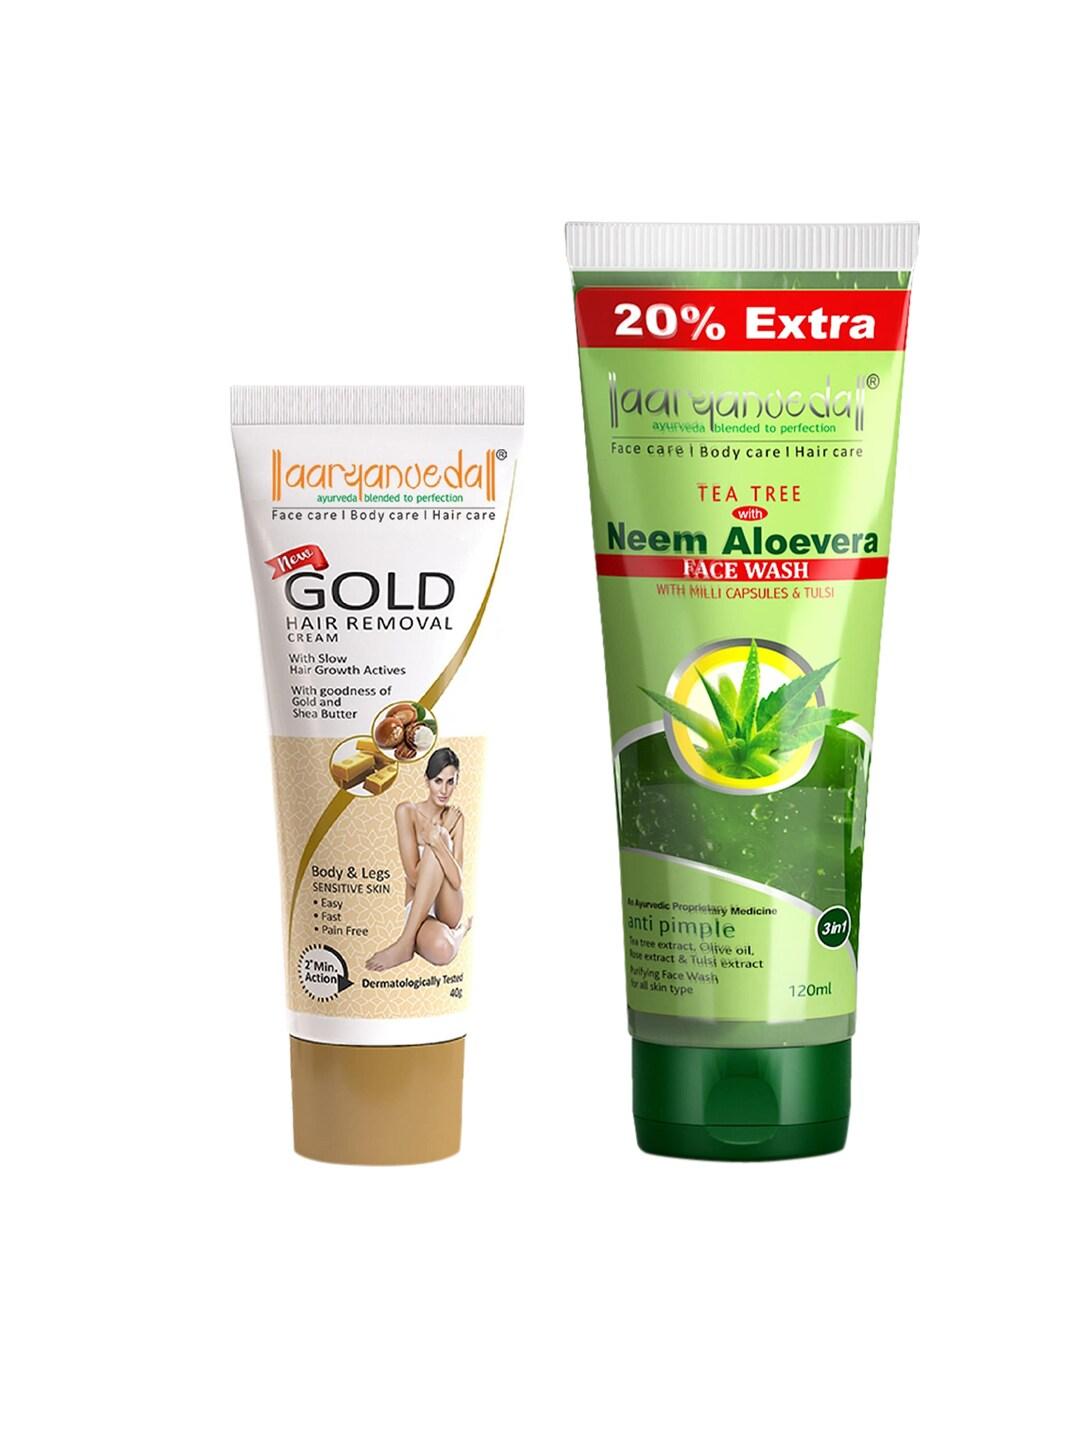 Aryanveda Tea Tree Face Wash With Neem & Aloe vera Extracts, 120ml & Gold Hair Removal Cream, 40gm